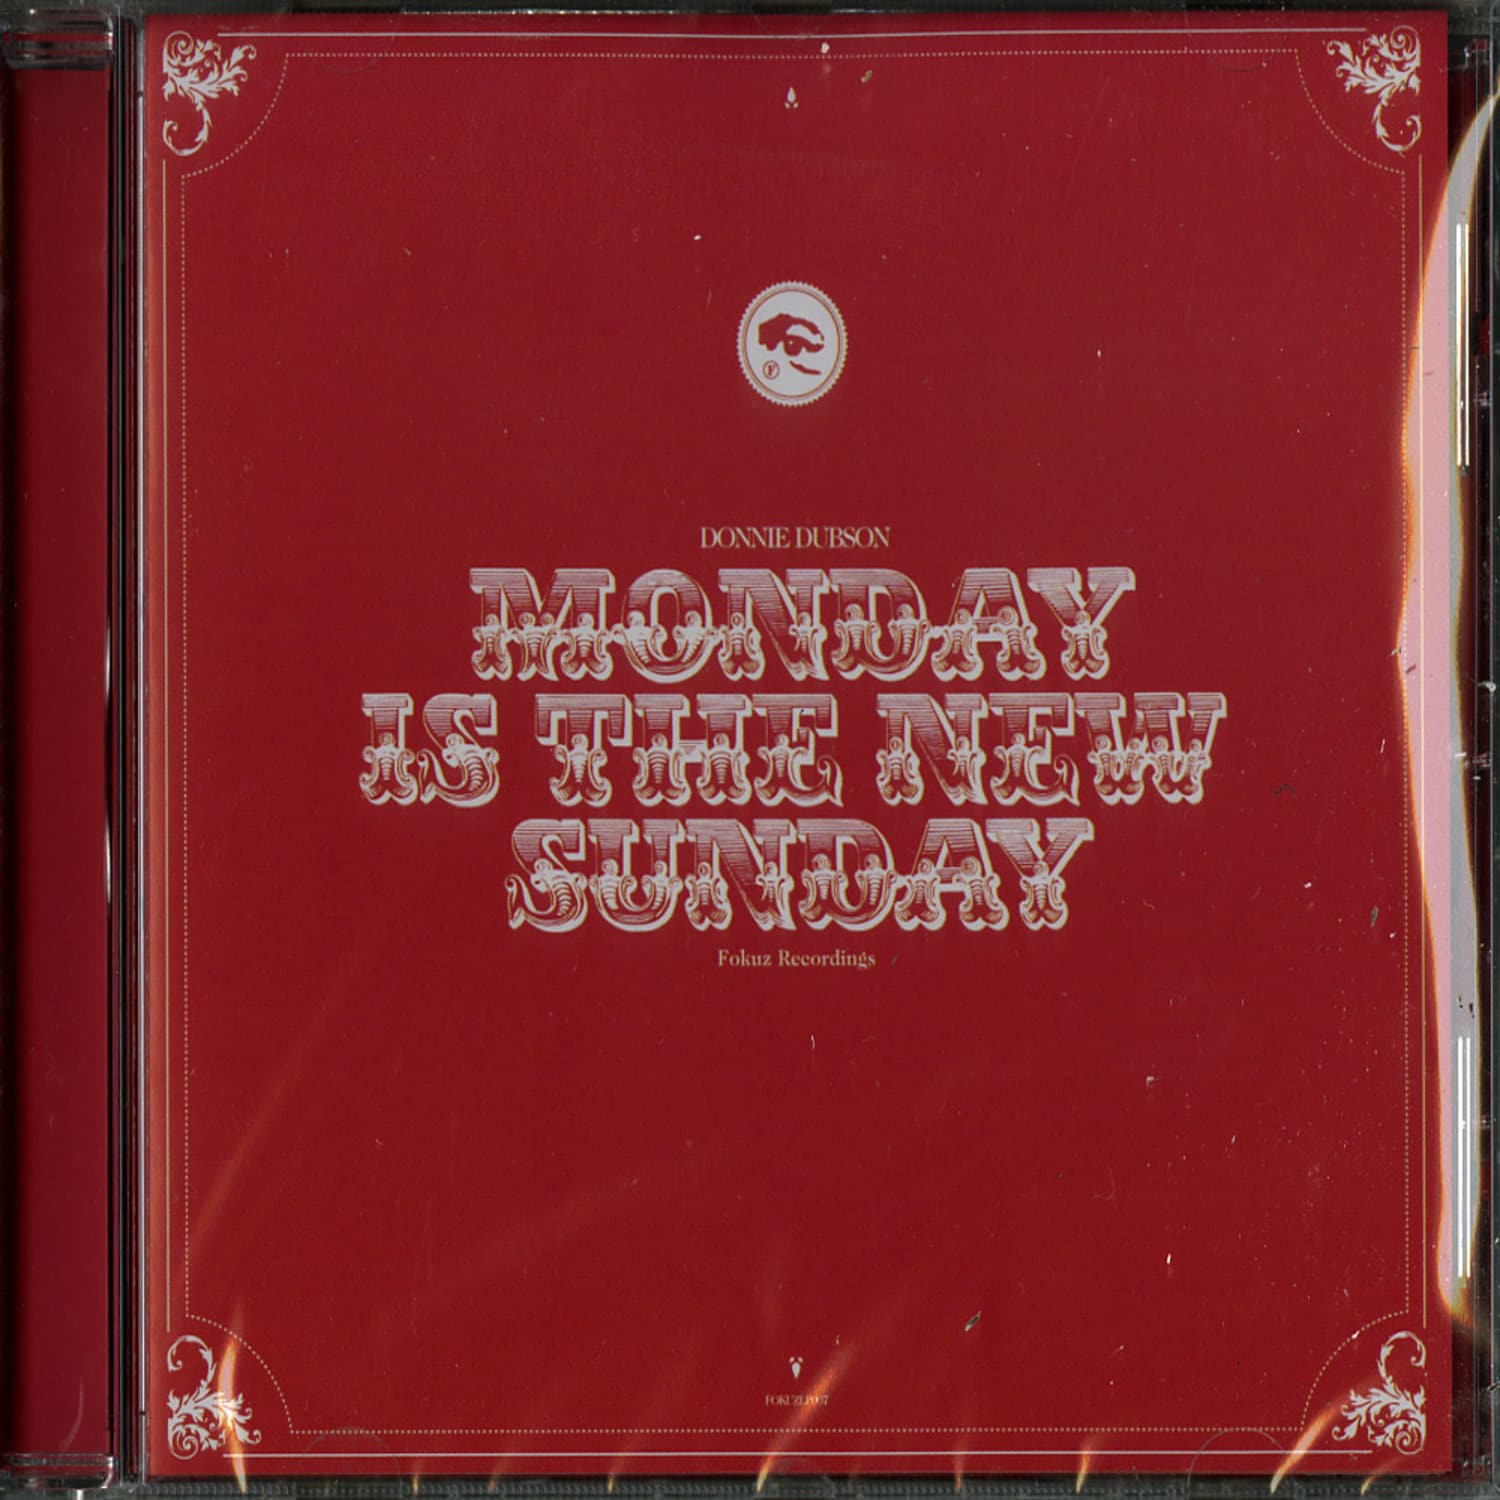 Donnie Dubson - MONDAY IS THE NEW SUNDAY 